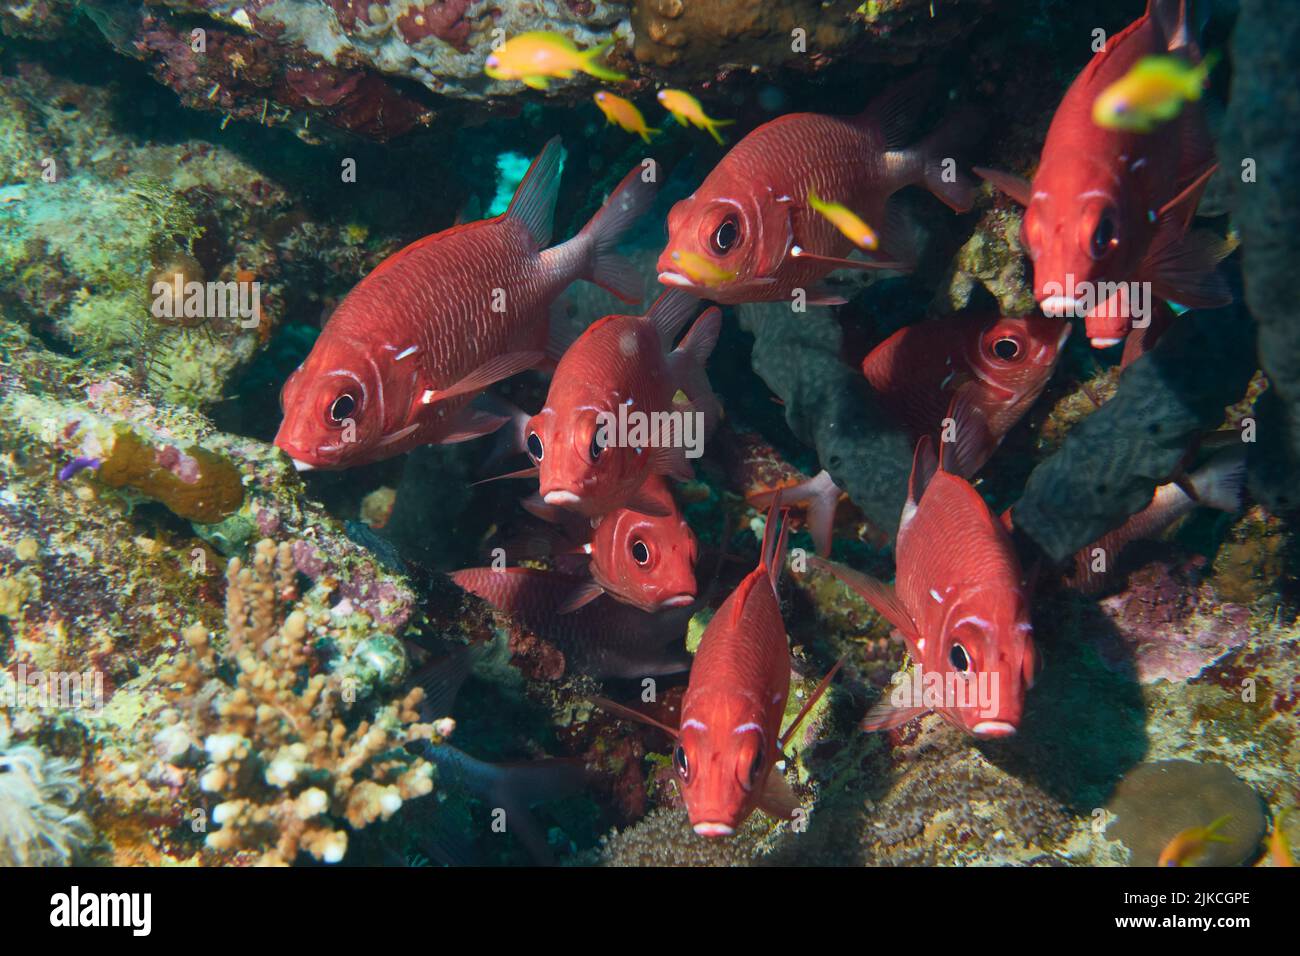 A close-up of a group of blotcheye soldierfish swimming in underwater coral reef, Red Sea, Egypt Stock Photo